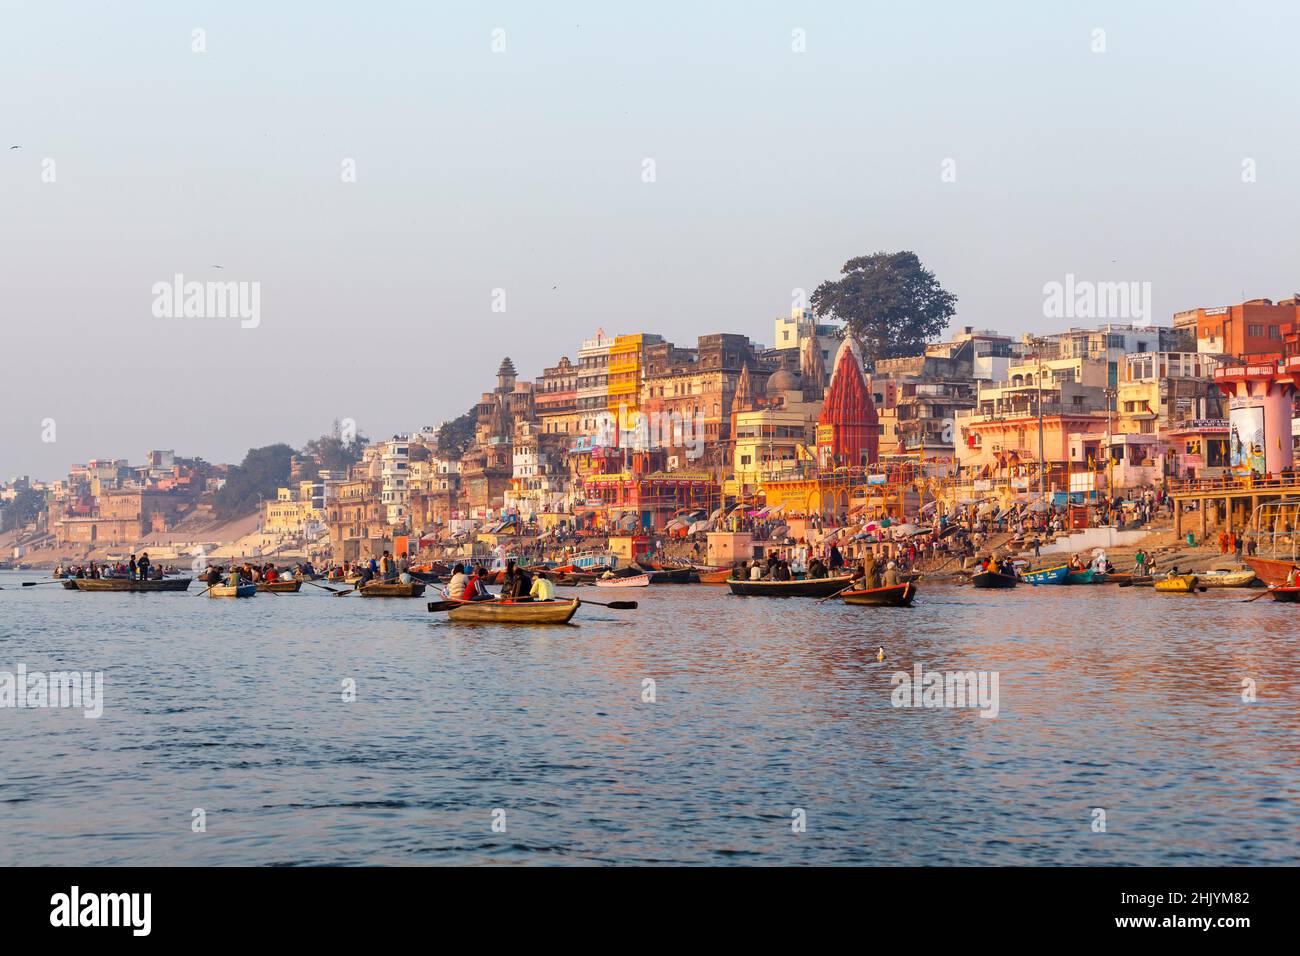 Tourist rowing boats and iconic riverside ghats viewing Prayag Ghat in Varanasi, a city on the River Ganges in Uttar Pradesh, north India Stock Photo